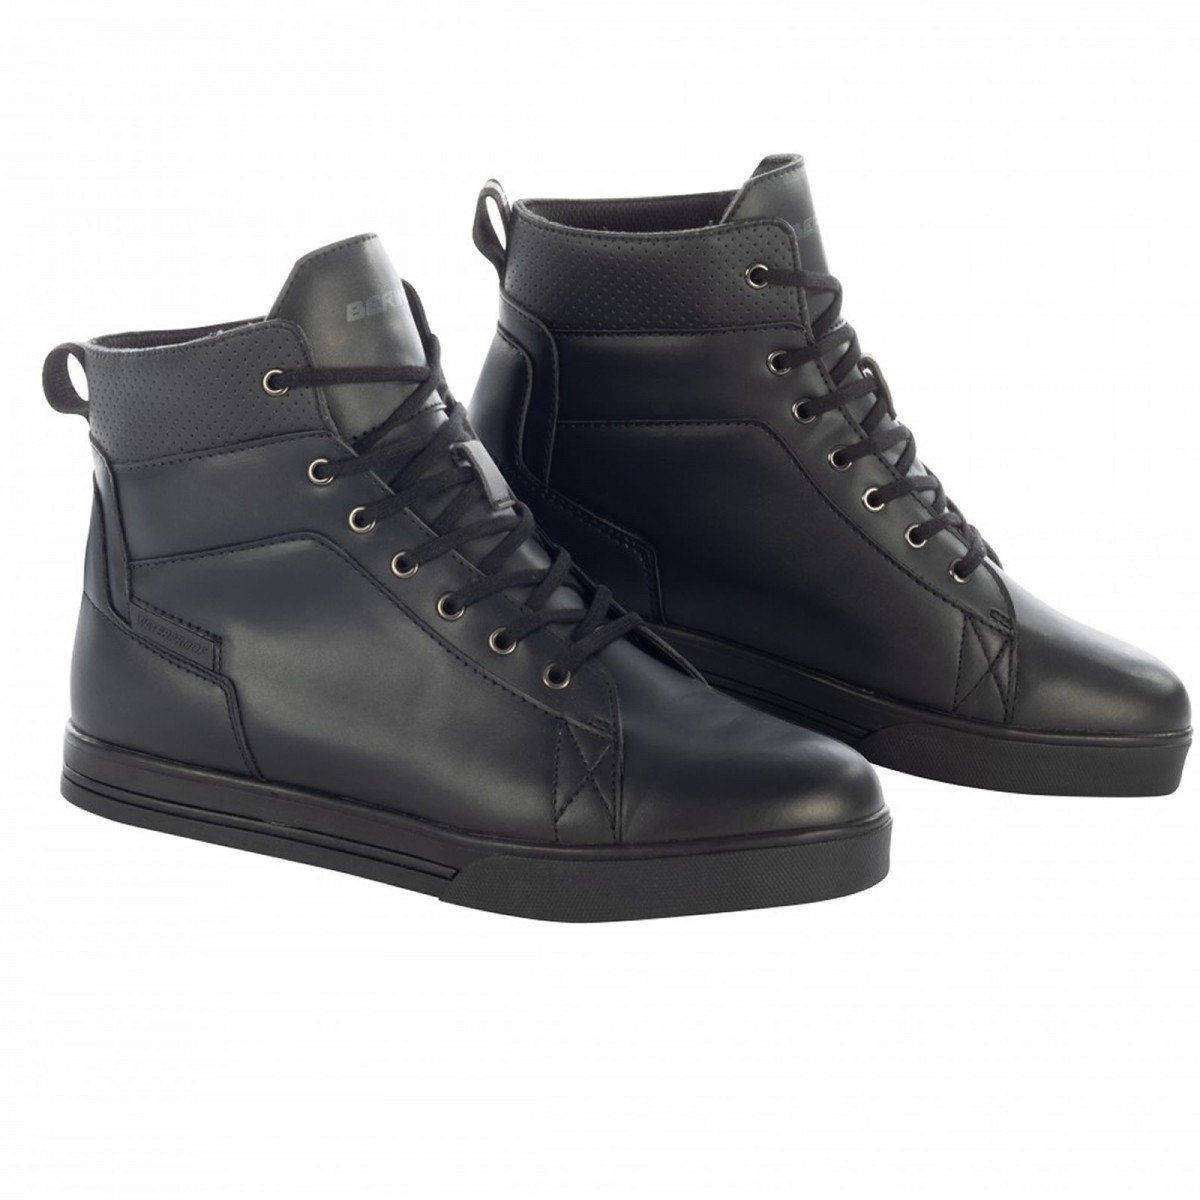 Image of EU Bering Indy Noir Chaussures Taille 43